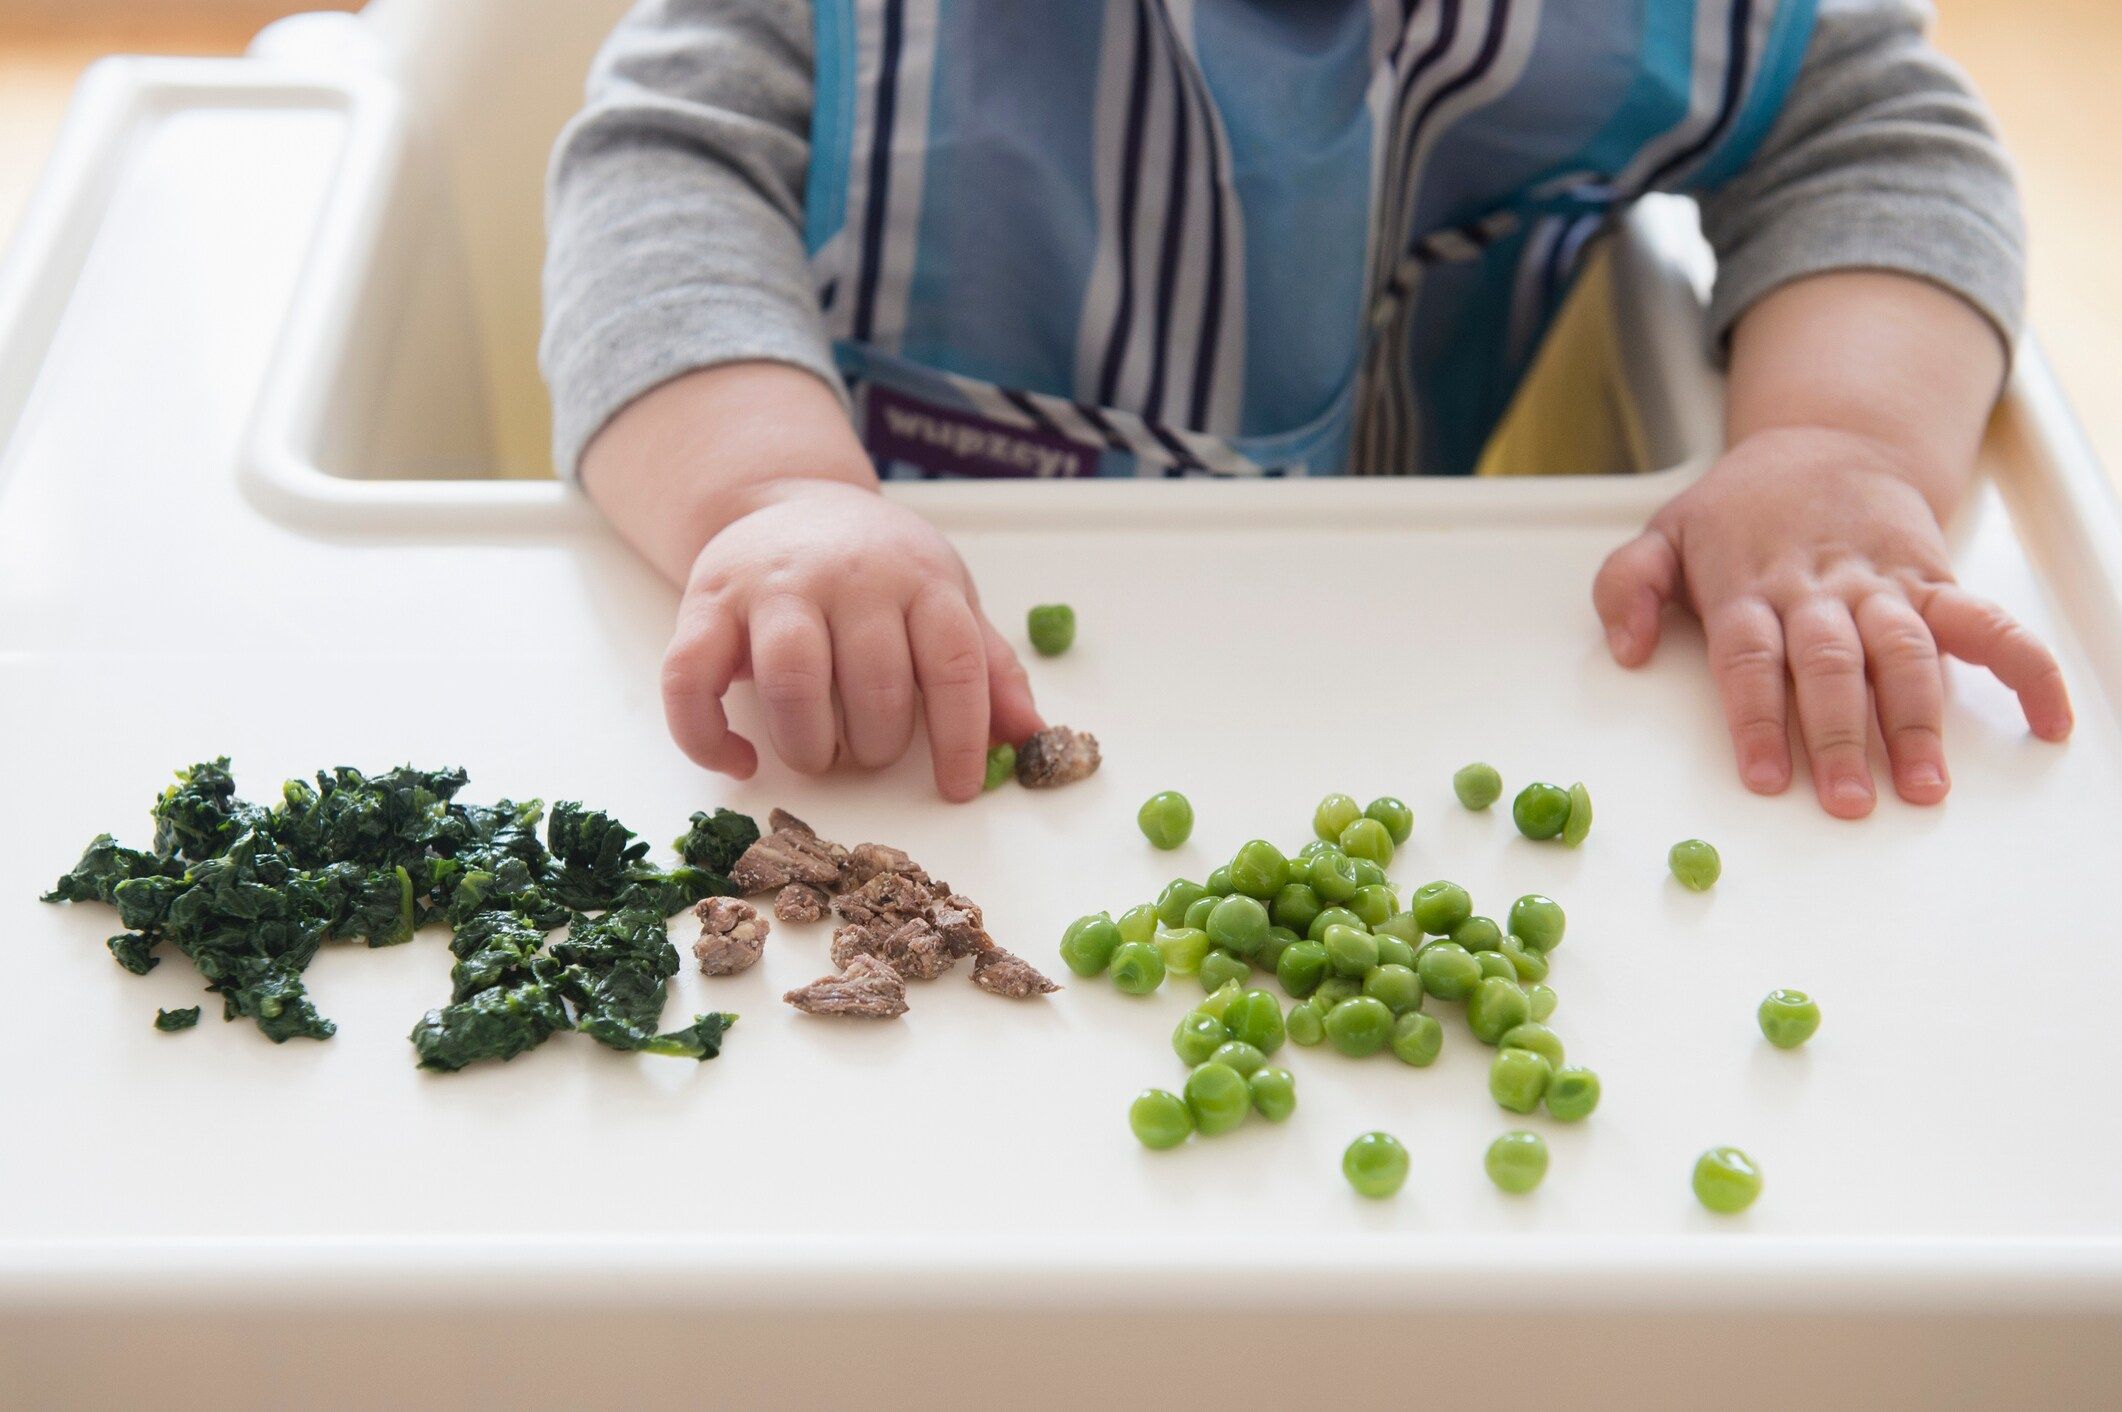 Baby-led weaning: A guide for curious parents